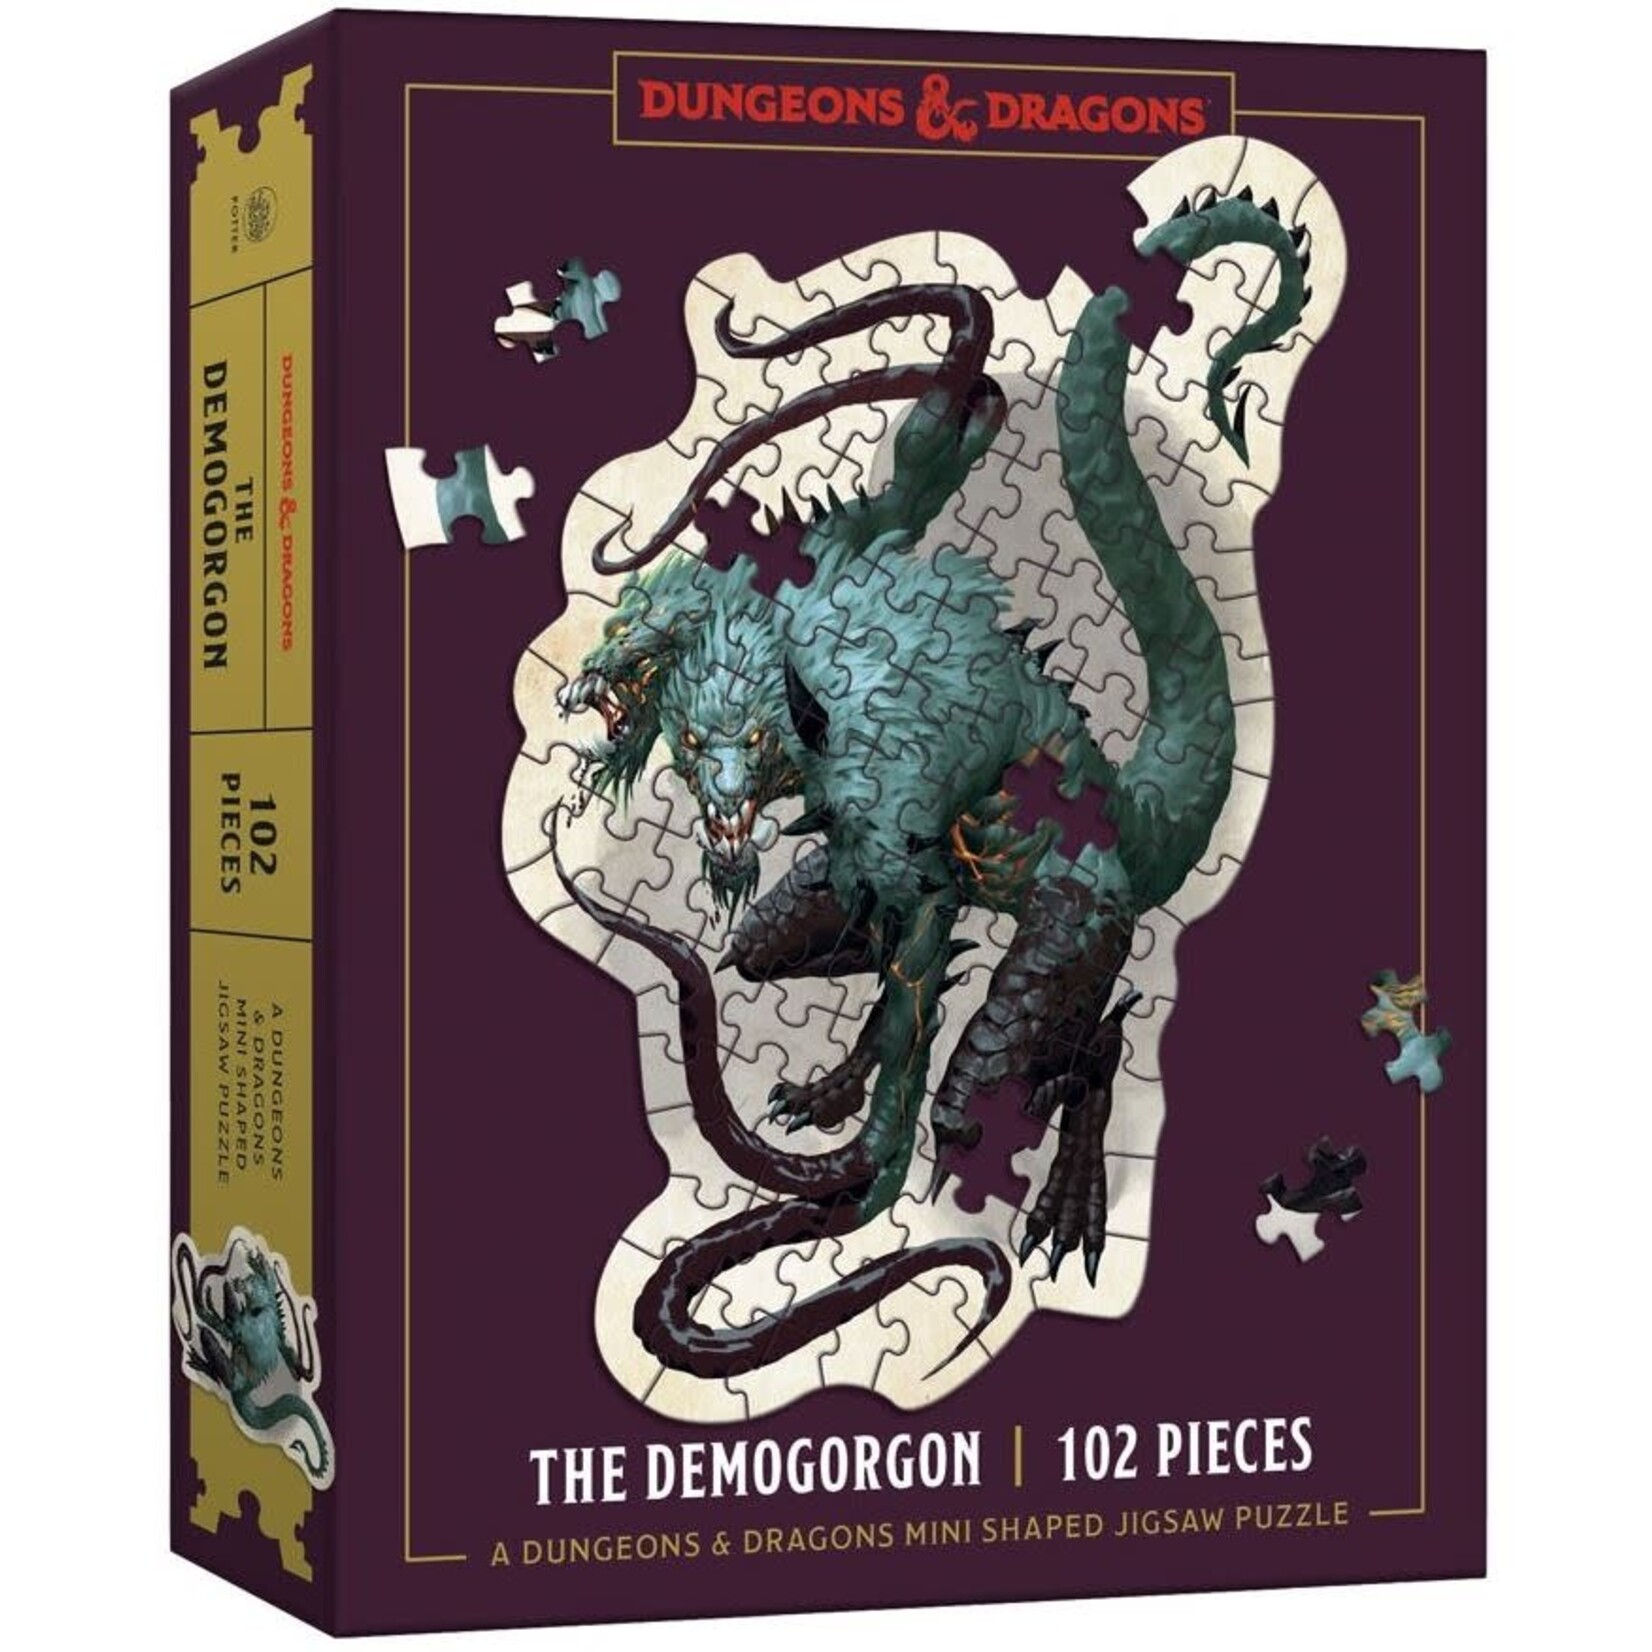 D&D Mini Shaped Jigsaw Puzzles: The Demogorgon Edition Dungeons & Dragons